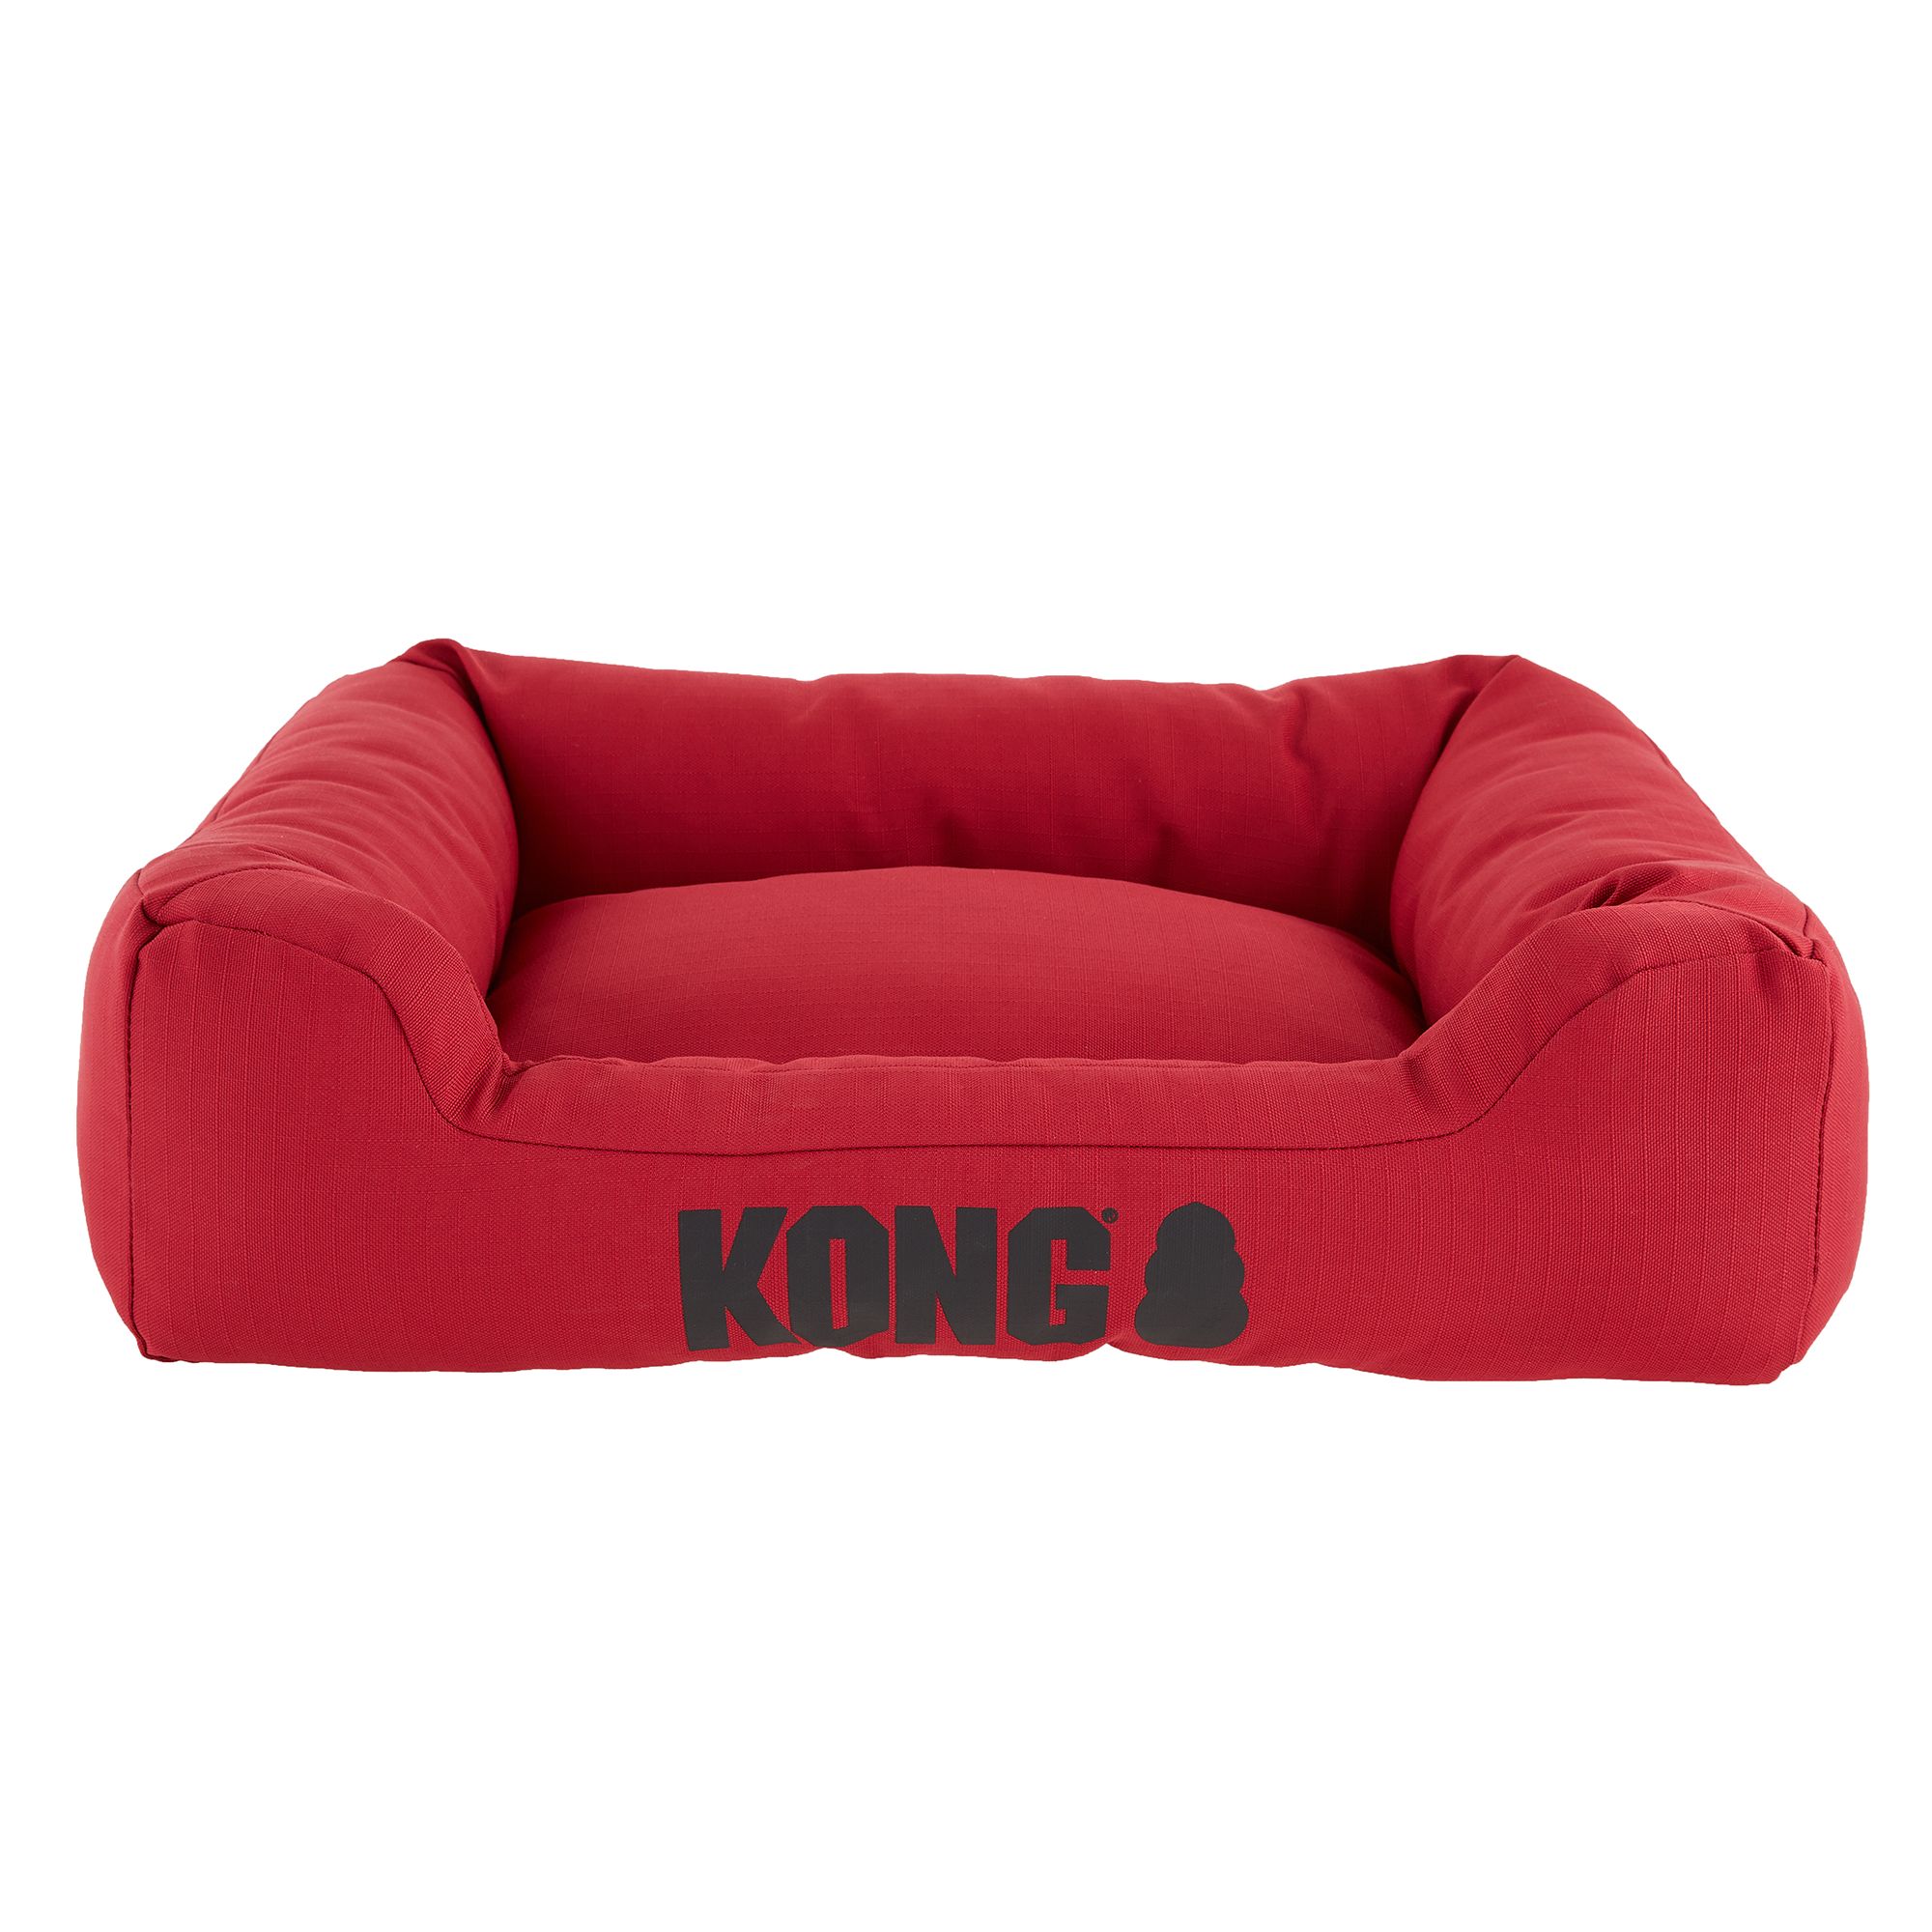 kong dog beds for sale